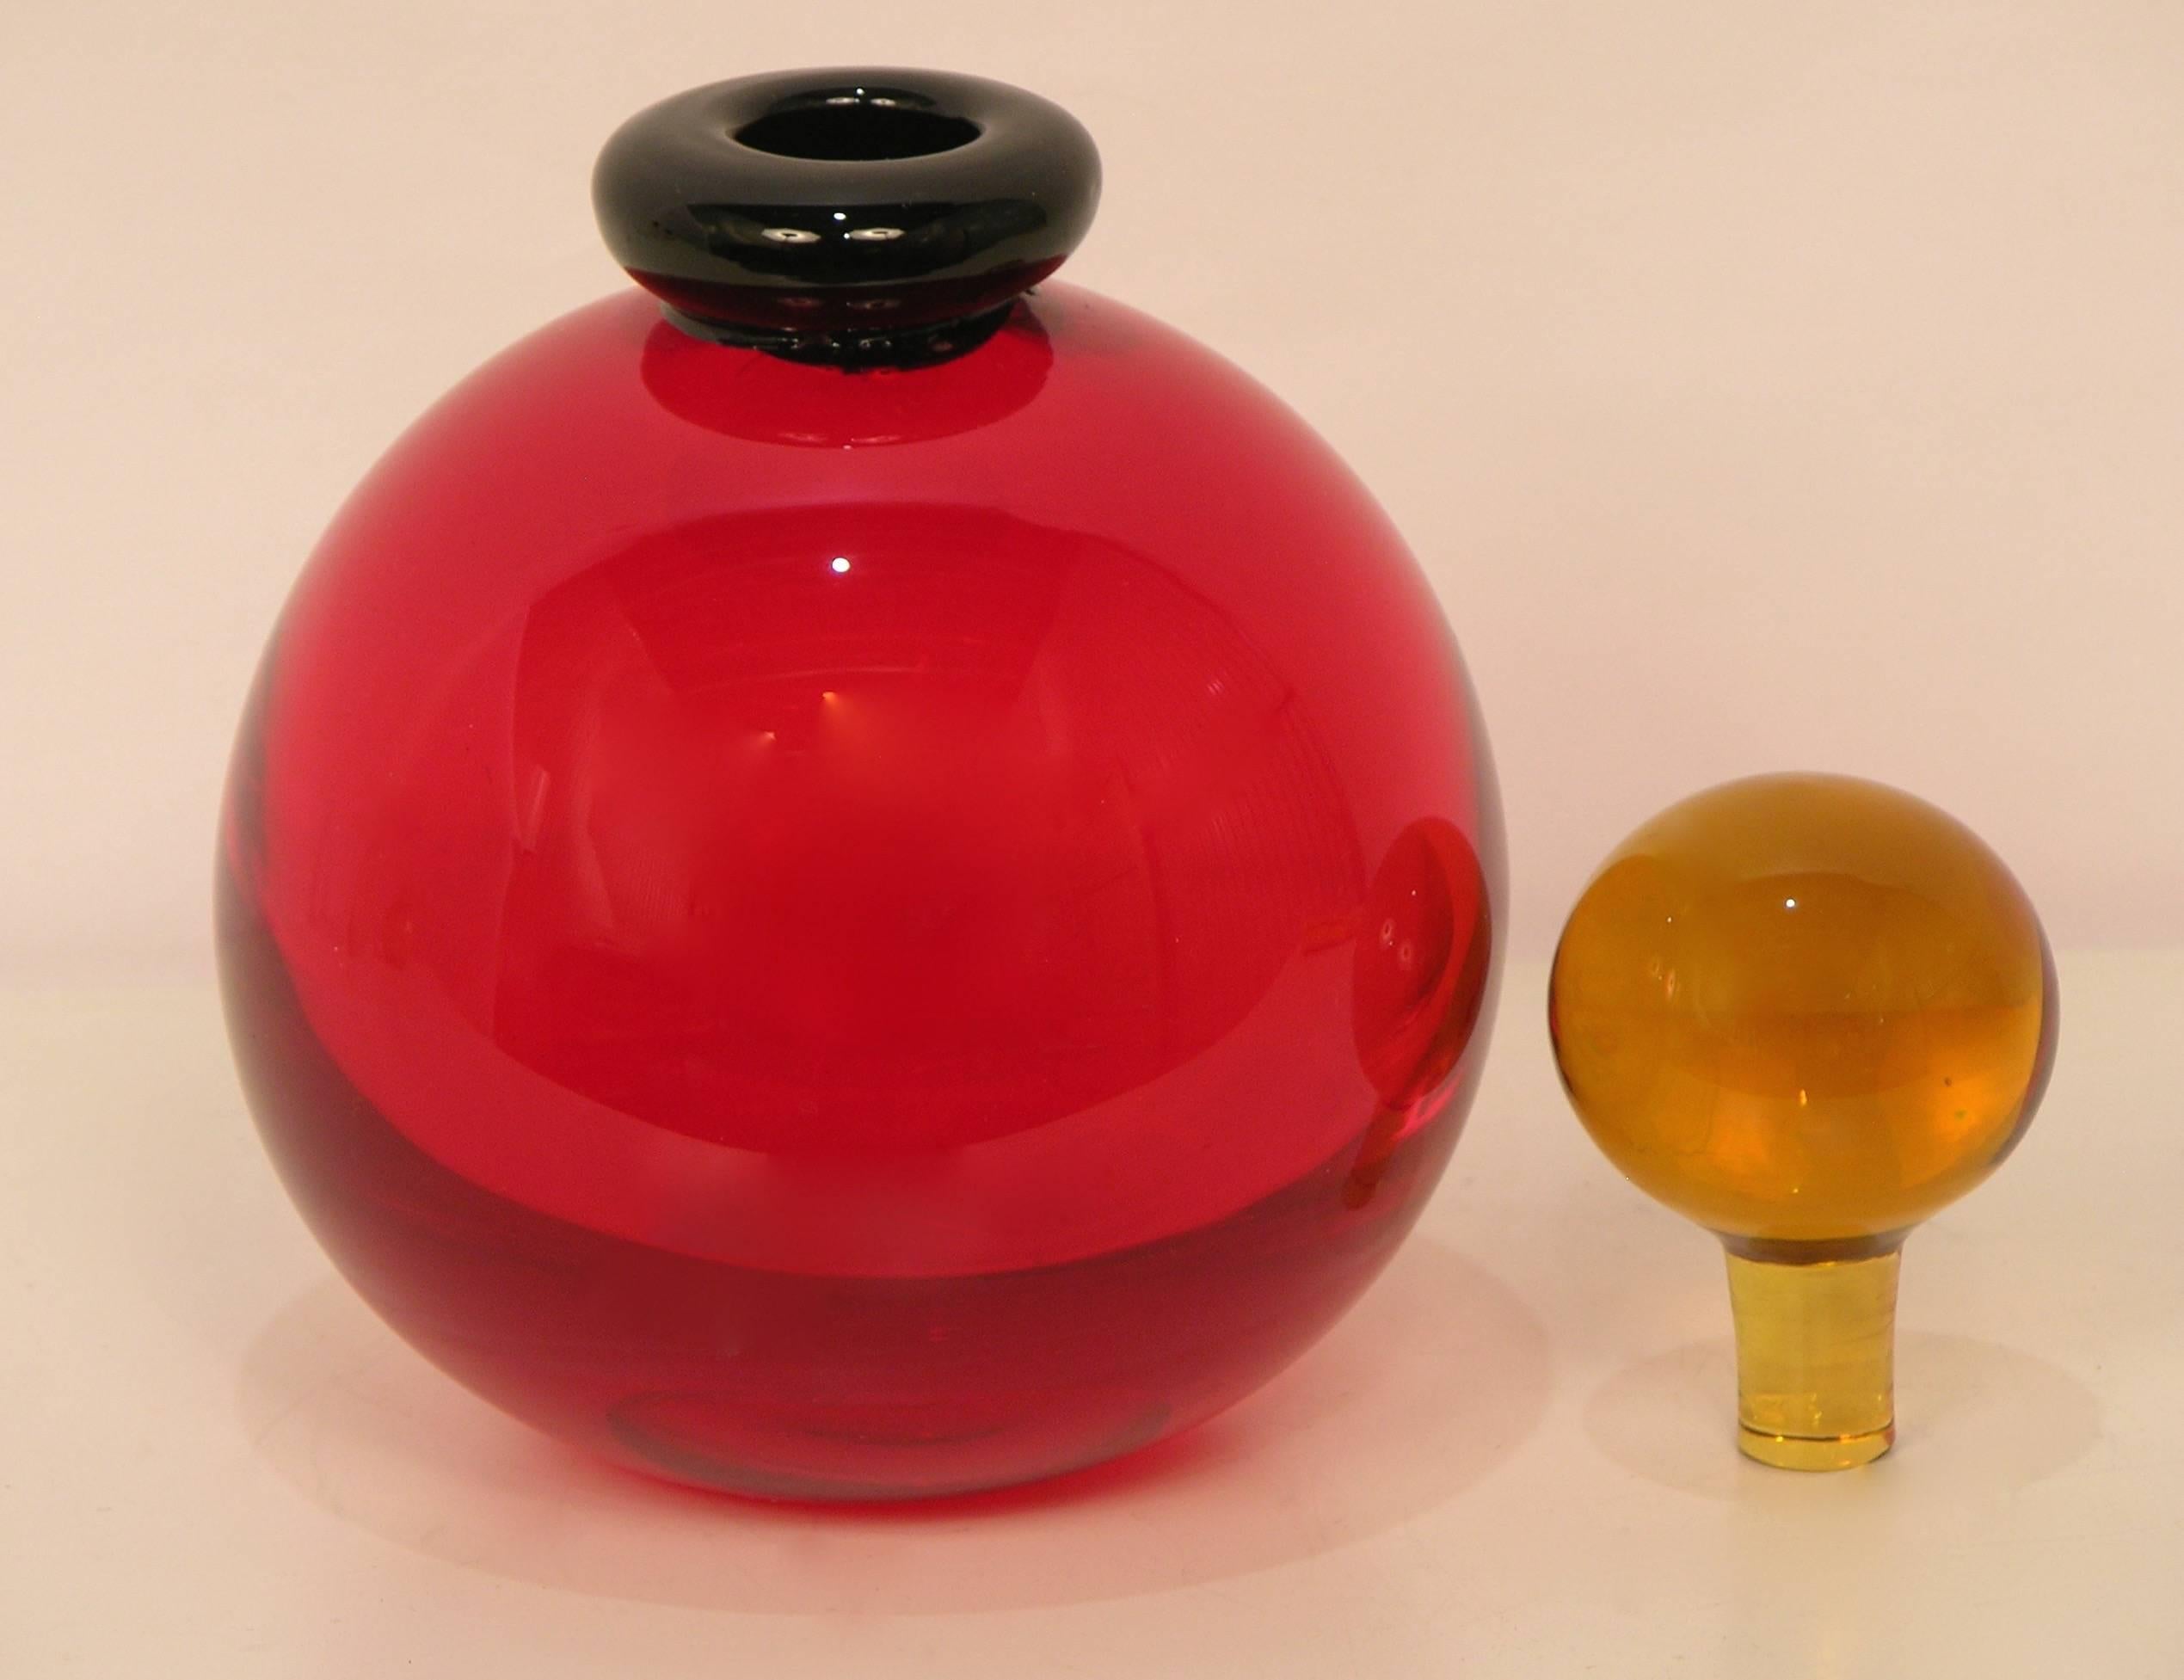 1970s Murano glass bottle by Archimede Seguso, signed. The blown red body is perfectly round, cleverly accented by a lipped neck in black glass accompanied by its original stopper in deep good glass.